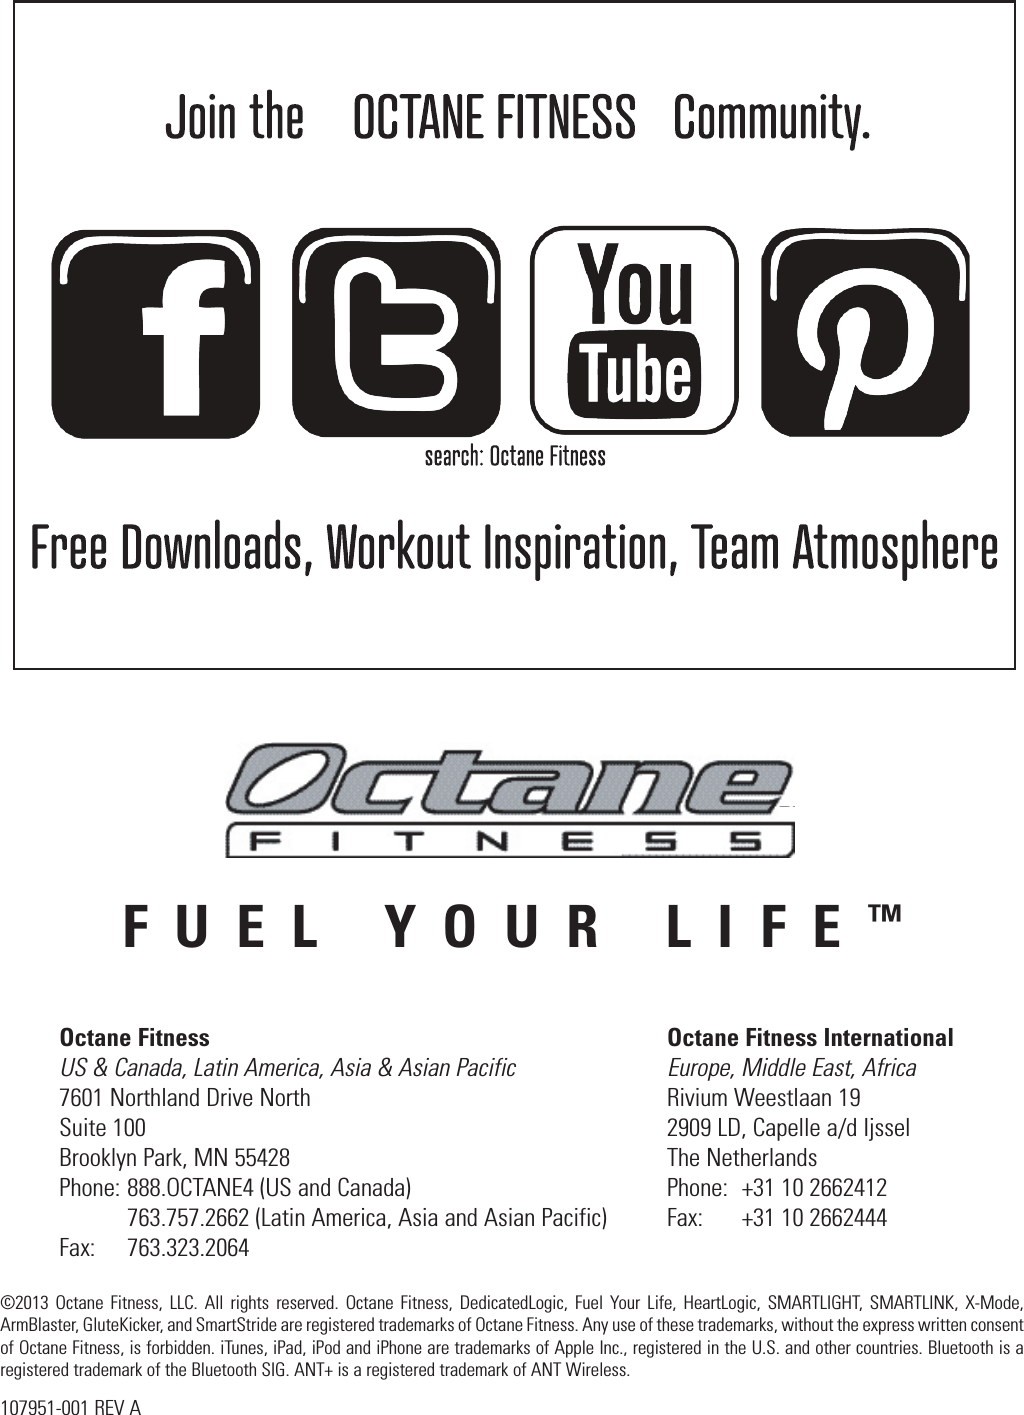 FUEL YOUR LIFE™Octane Fitness  Octane Fitness International US &amp; Canada, Latin America, Asia &amp; Asian Pacific  Europe, Middle East, Africa 7601 Northland Drive North  Rivium Weestlaan 19 Suite 100  2909 LD, Capelle a/d Ijssel Brooklyn Park, MN 55428  The Netherlands Phone: 888.OCTANE4 (US and Canada)  Phone:  +31 10 2662412   763.757.2662 (Latin America, Asia and Asian Pacific)  Fax:  +31 10 2662444 Fax:   763.323.2064©2013 Octane Fitness, LLC. All rights reserved. Octane Fitness, DedicatedLogic, Fuel Your Life, HeartLogic, SMARTLIGHT, SMARTLINK, X-Mode, ArmBlaster, GluteKicker, and SmartStride are registered trademarks of Octane Fitness. Any use of these trademarks, without the express written consent of Octane Fitness, is forbidden. iTunes, iPad, iPod and iPhone are trademarks of Apple Inc., registered in the U.S. and other countries. Bluetooth is a registered trademark of the Bluetooth SIG. ANT+ is a registered trademark of ANT Wireless.107951-001 REV A